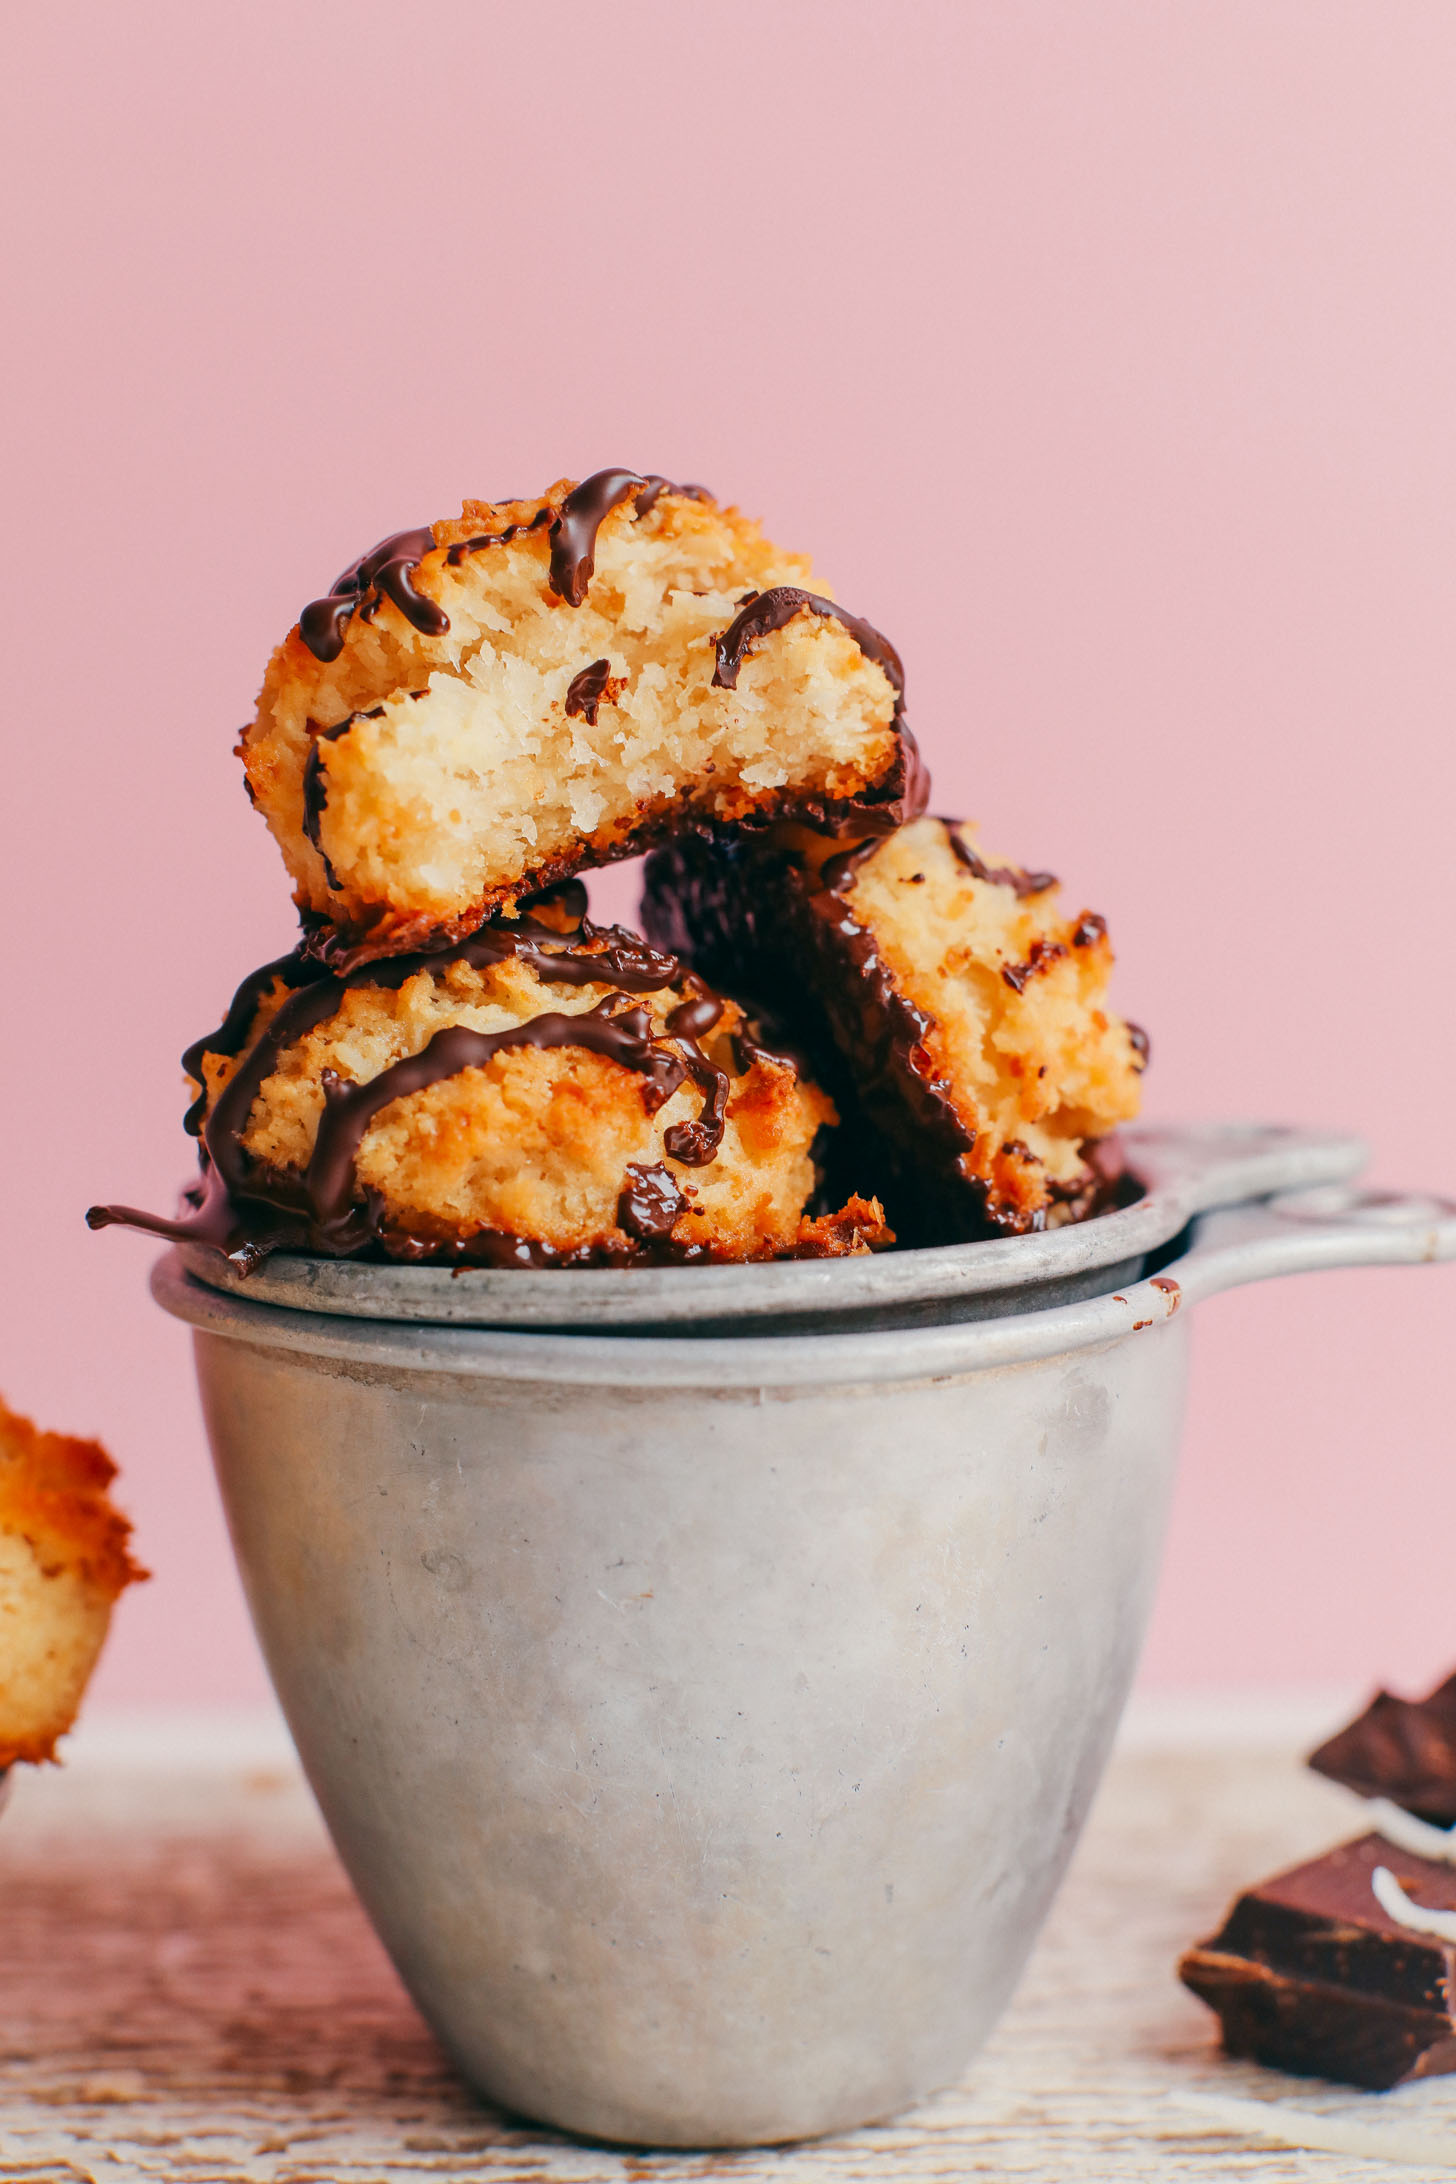 Crispy Vegan Macaroons with chocolate drizzle balanced on vintage measuring cups